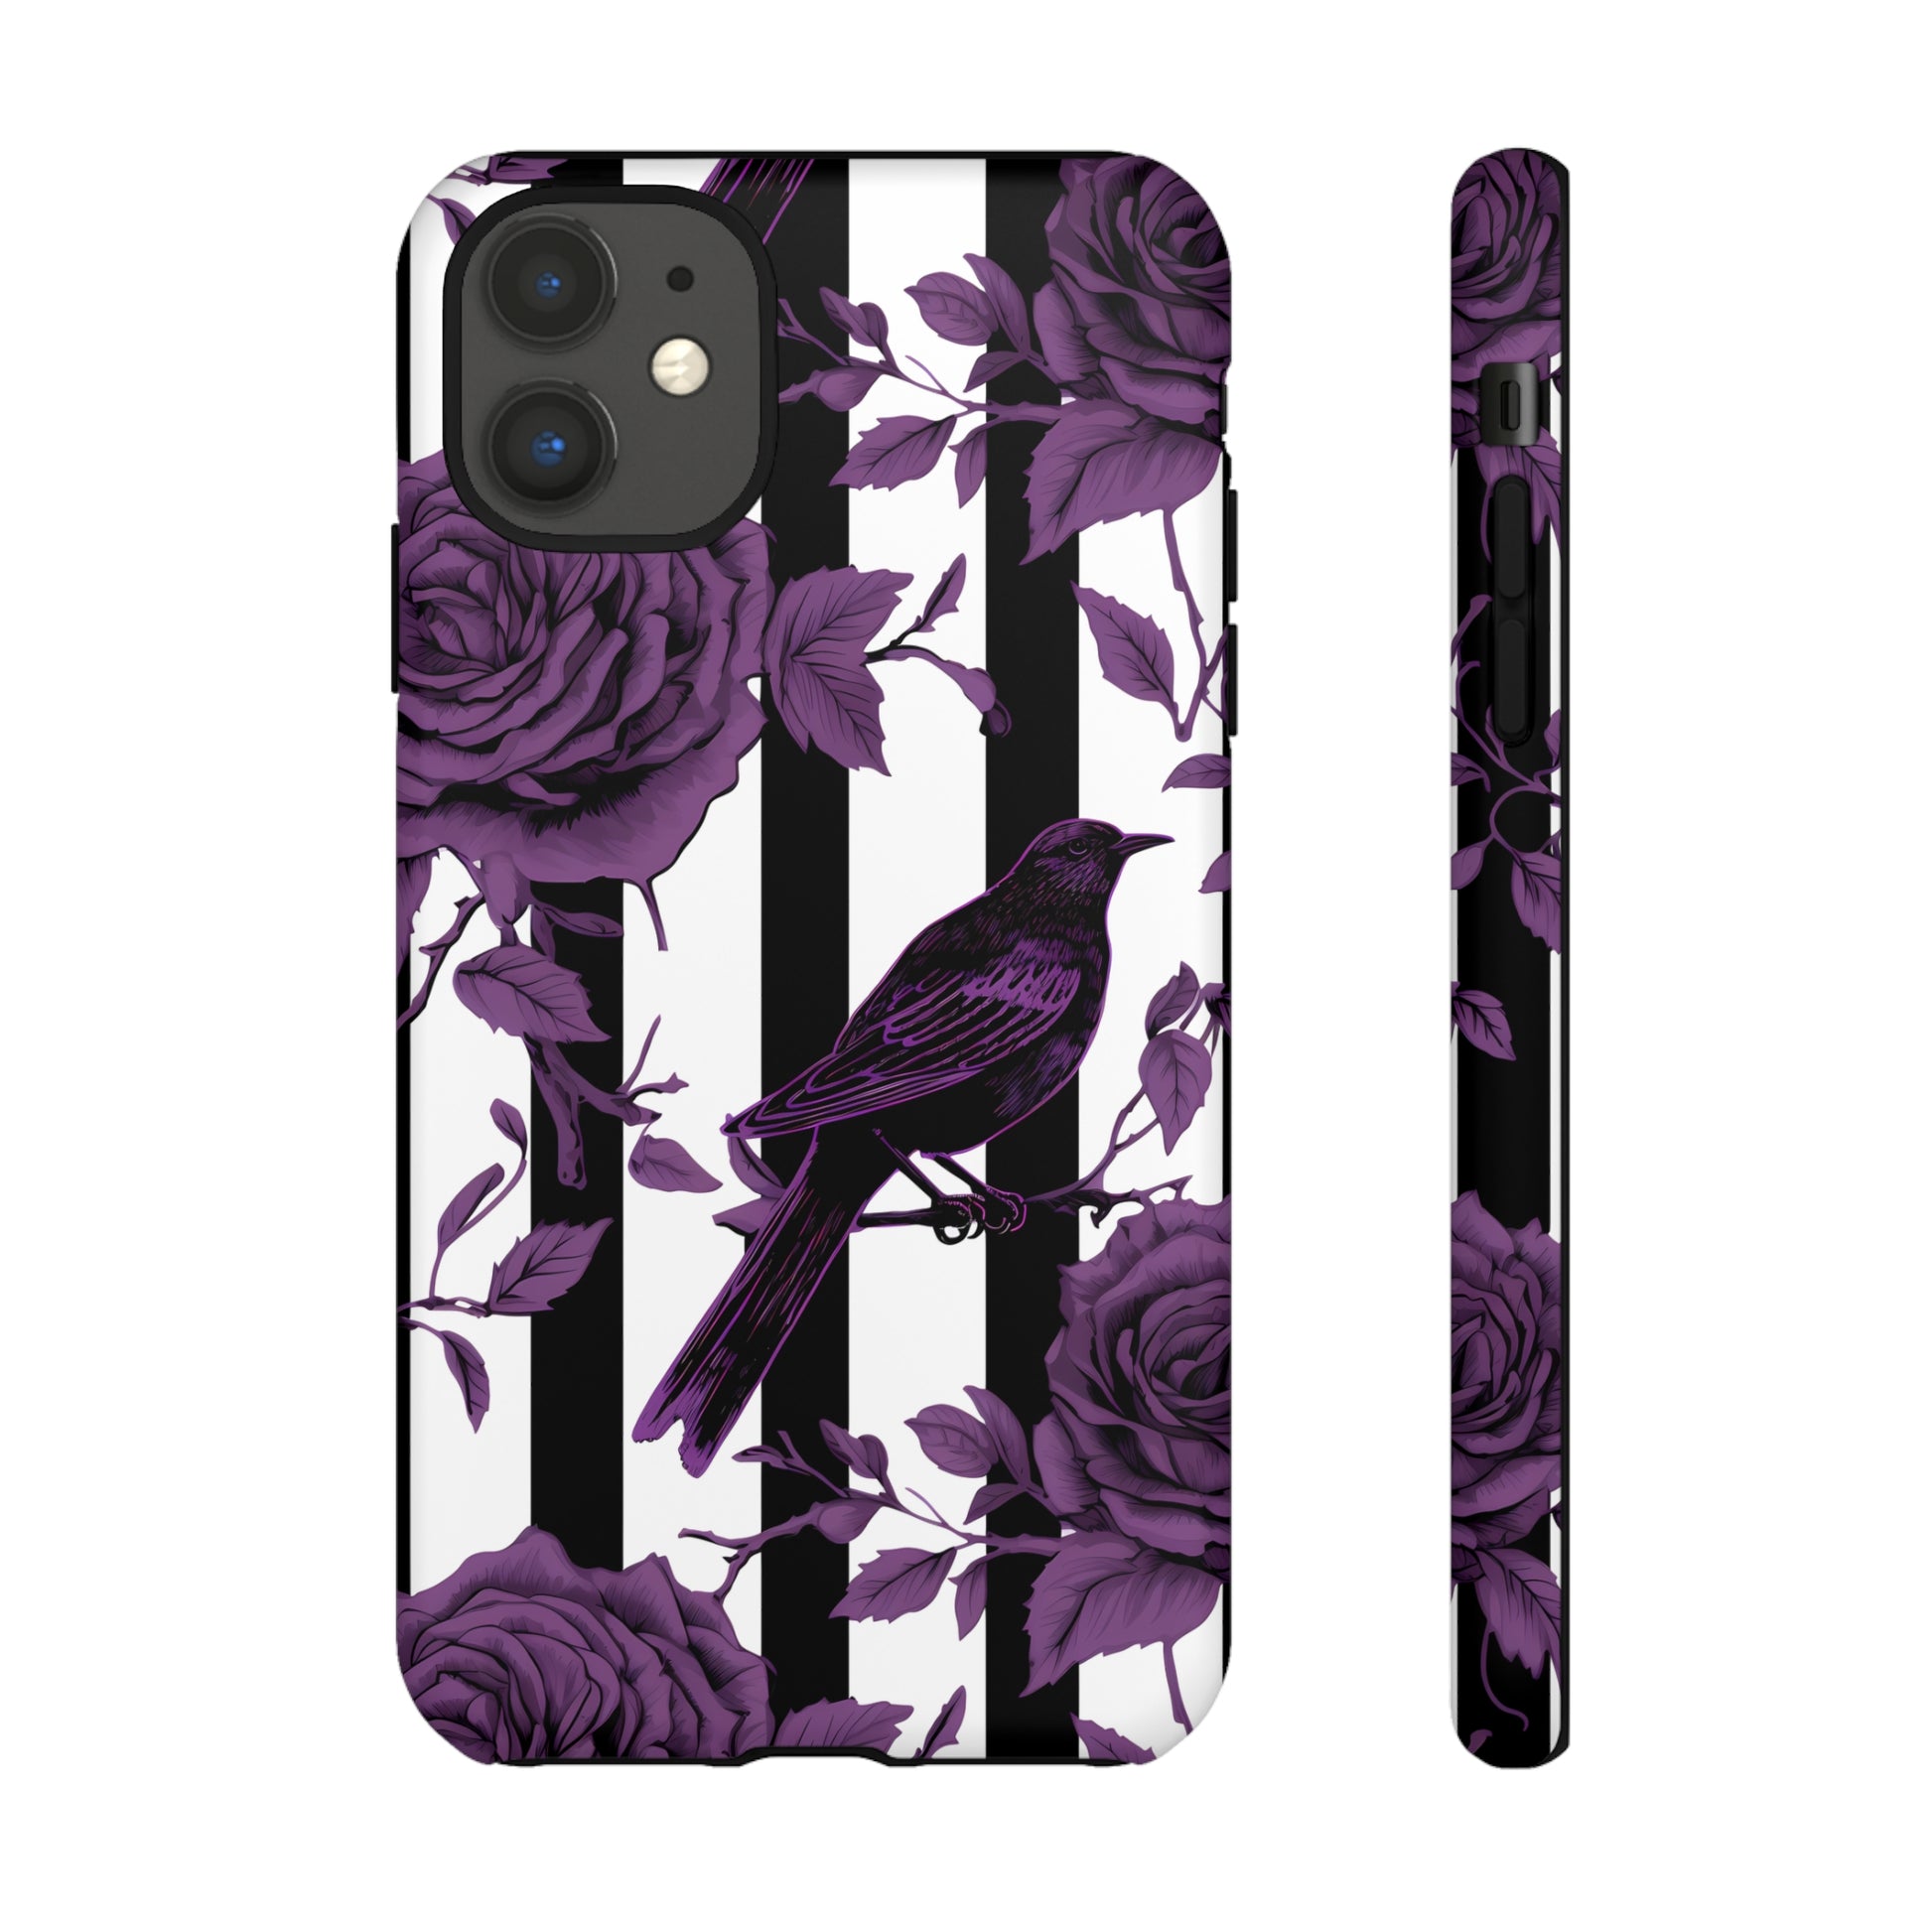 Striped Crows and Roses Tough Cases for iPhone Samsung Google PhonesPhone CaseVTZdesignsiPhone 11MatteAccessoriescrowsGlossy